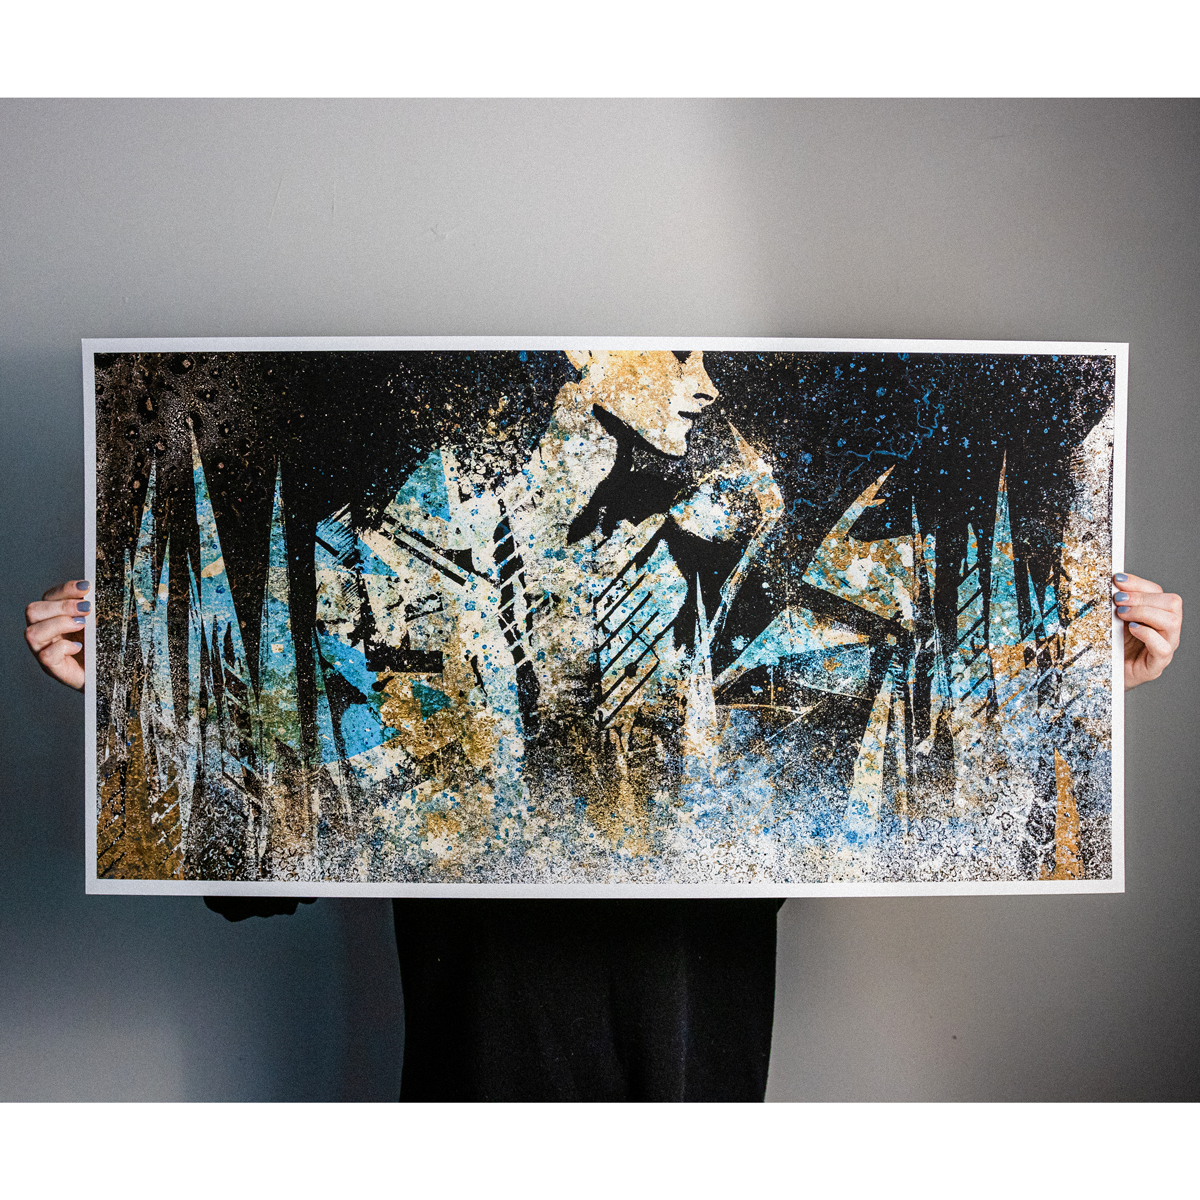 J. Bannon "Wretched World" Limited Print